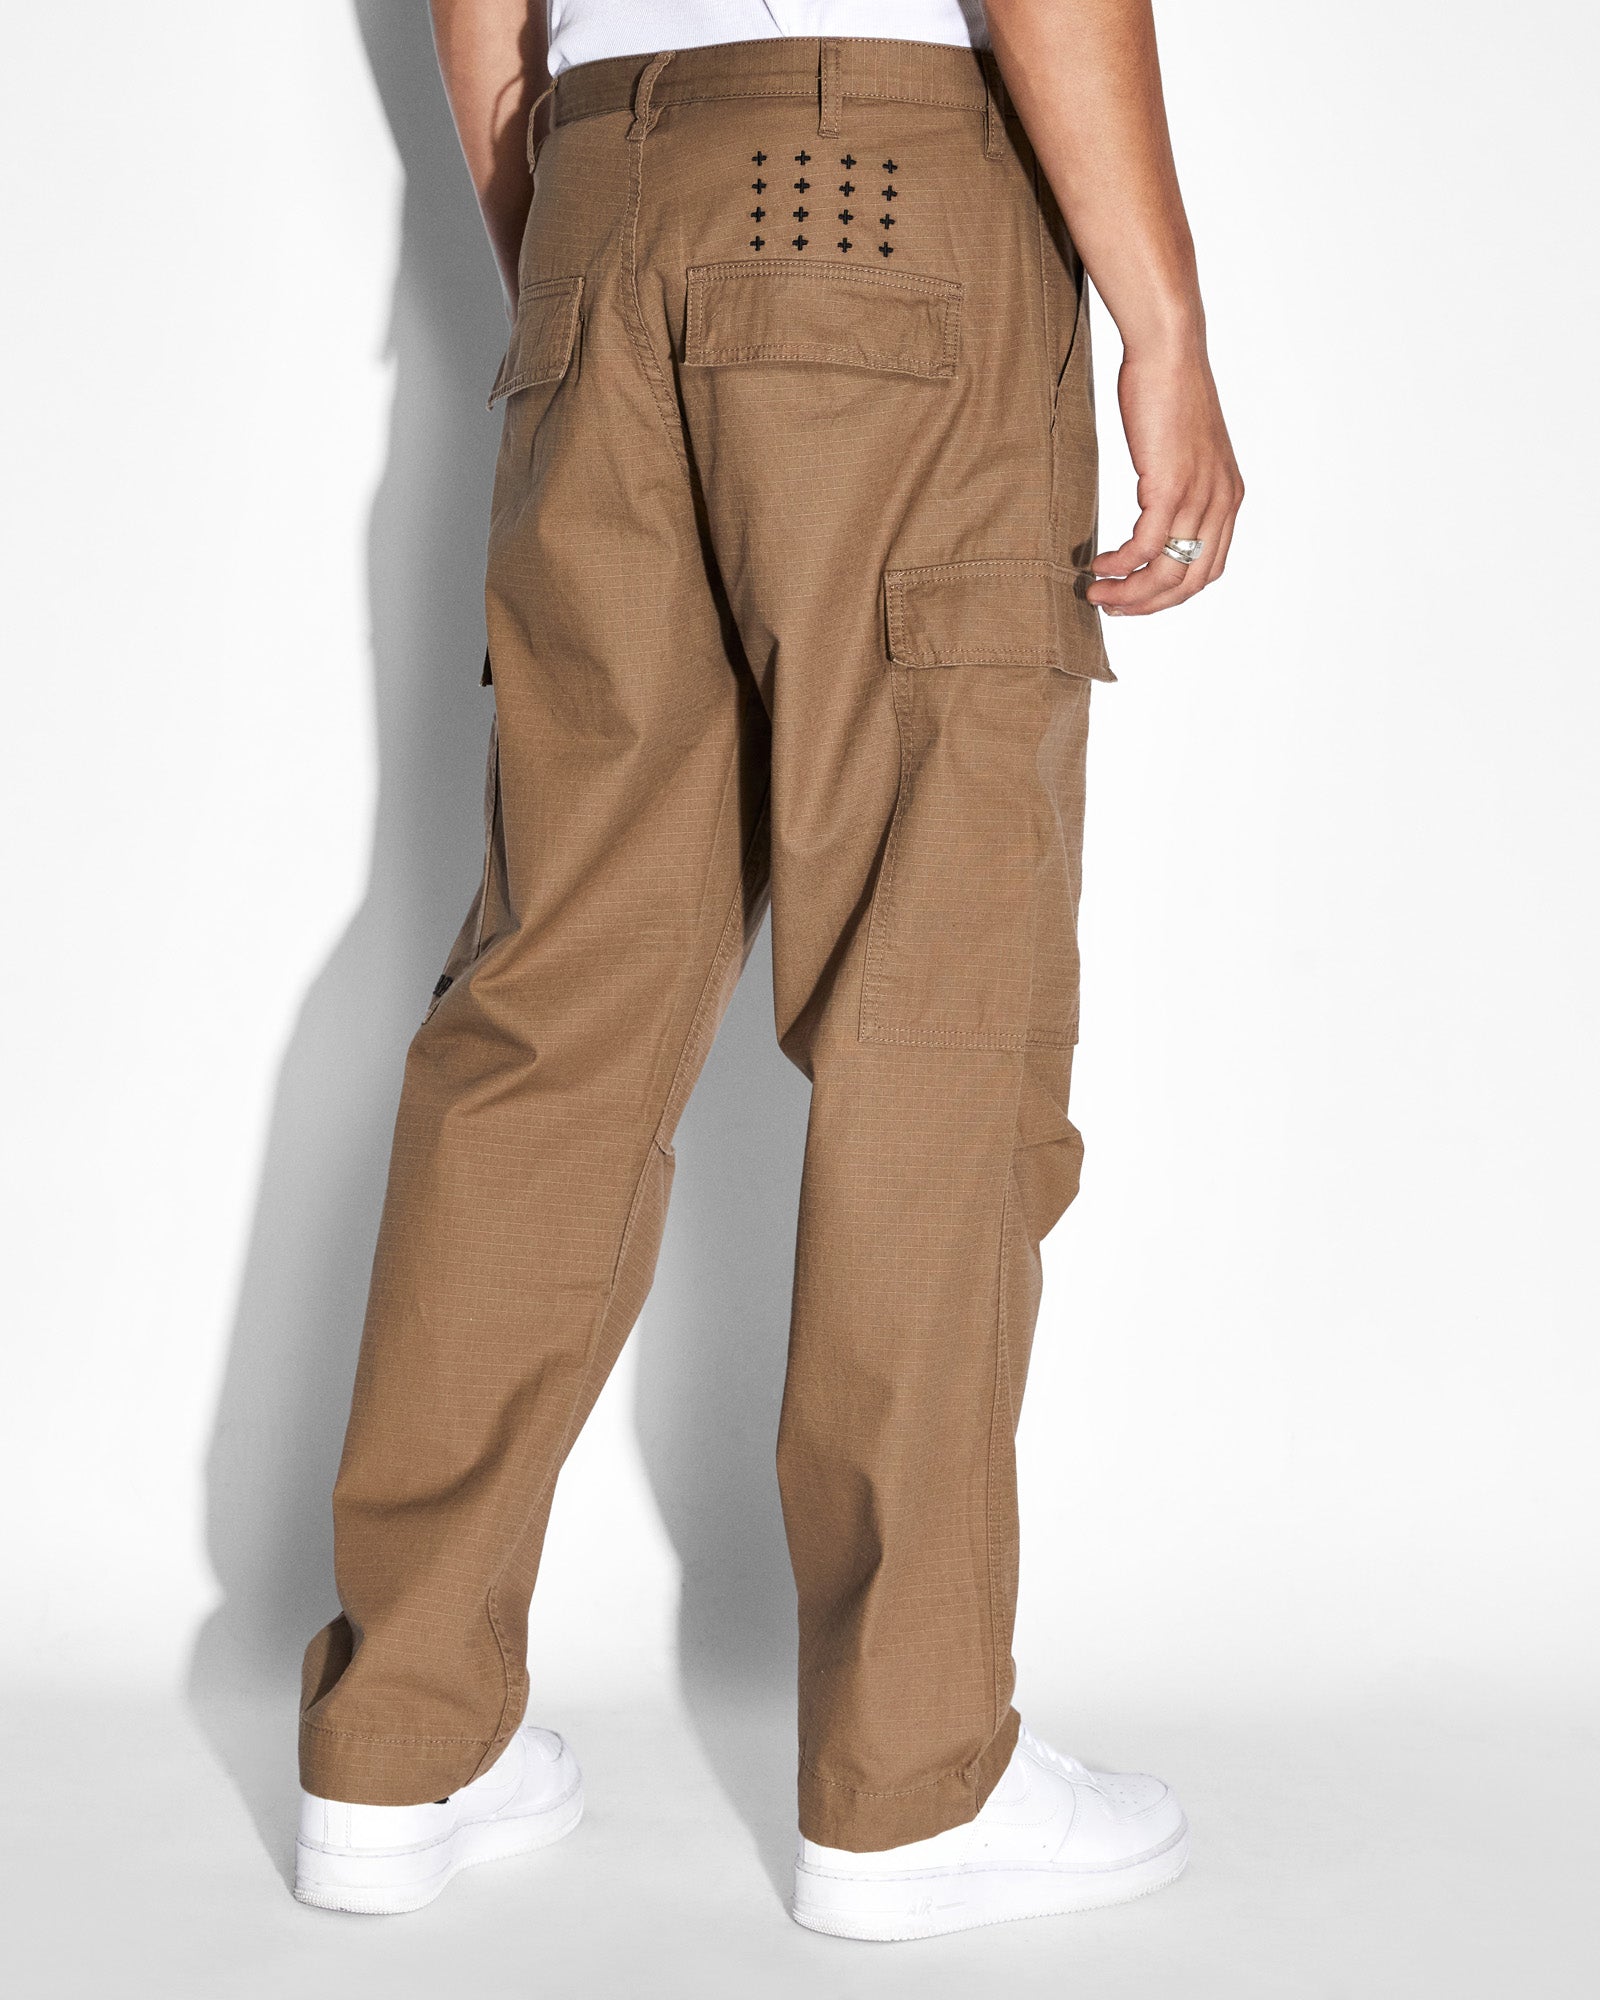 BAM Loose Baggy Cargo Pants for Mens - 100% Cotton Brown Cargo Pant for  Summer - Slim Fit Casual Drawstring Elastic Waist Pants - Comfortable Home  Wear and Gym (Brown, 36): Buy